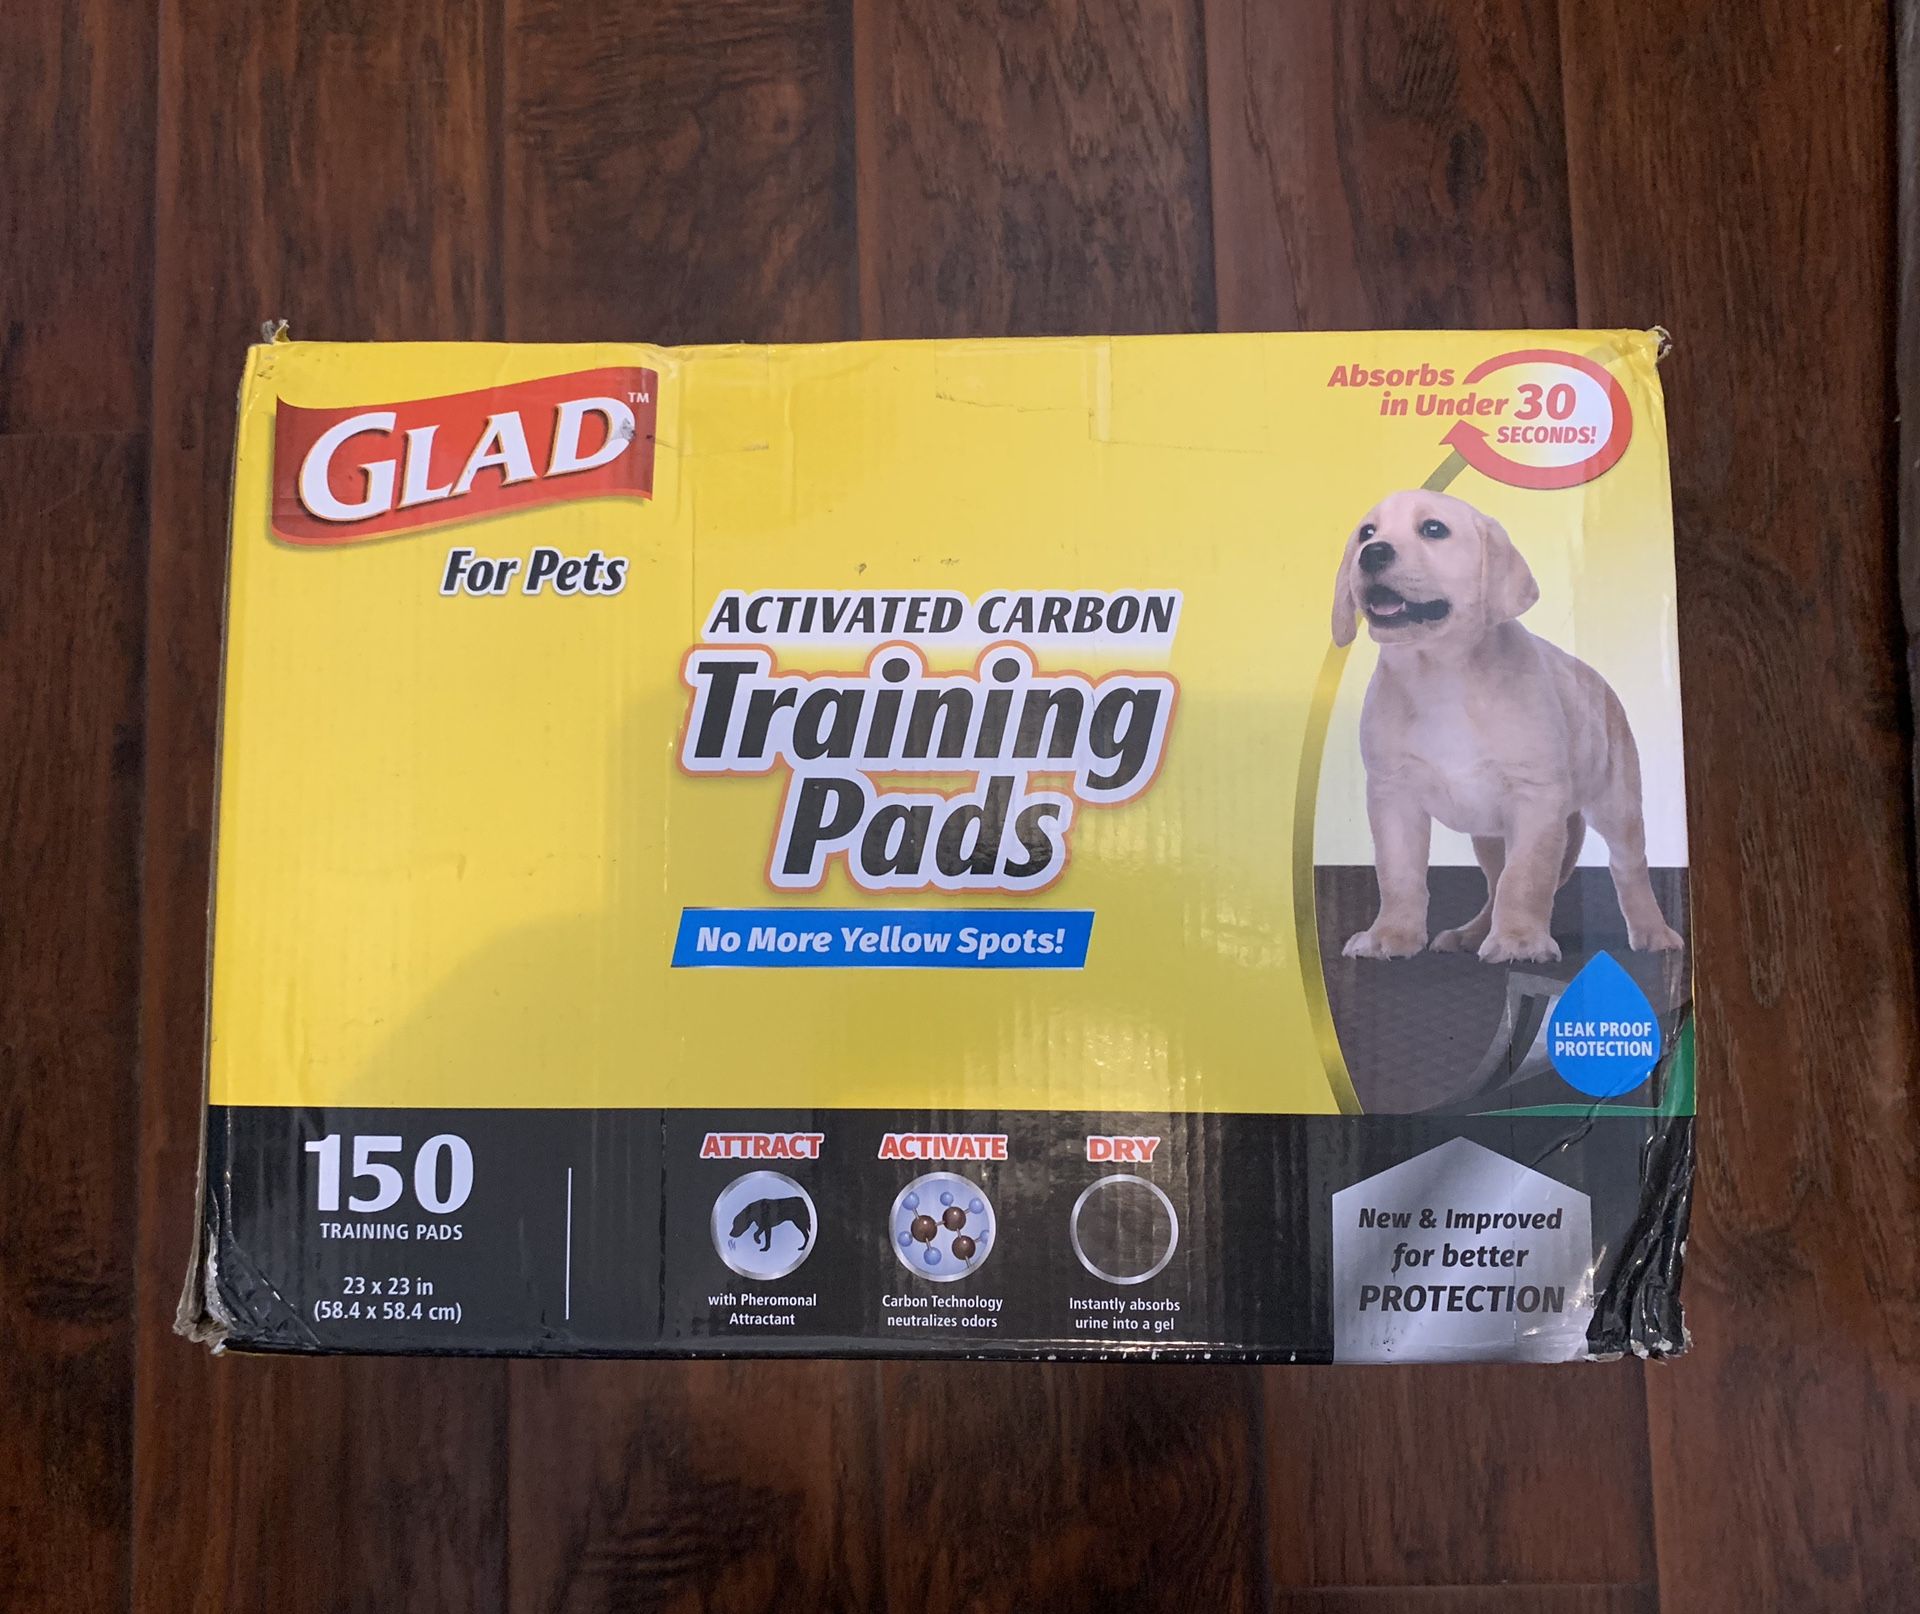 Glad activated carbon training pads 150ct